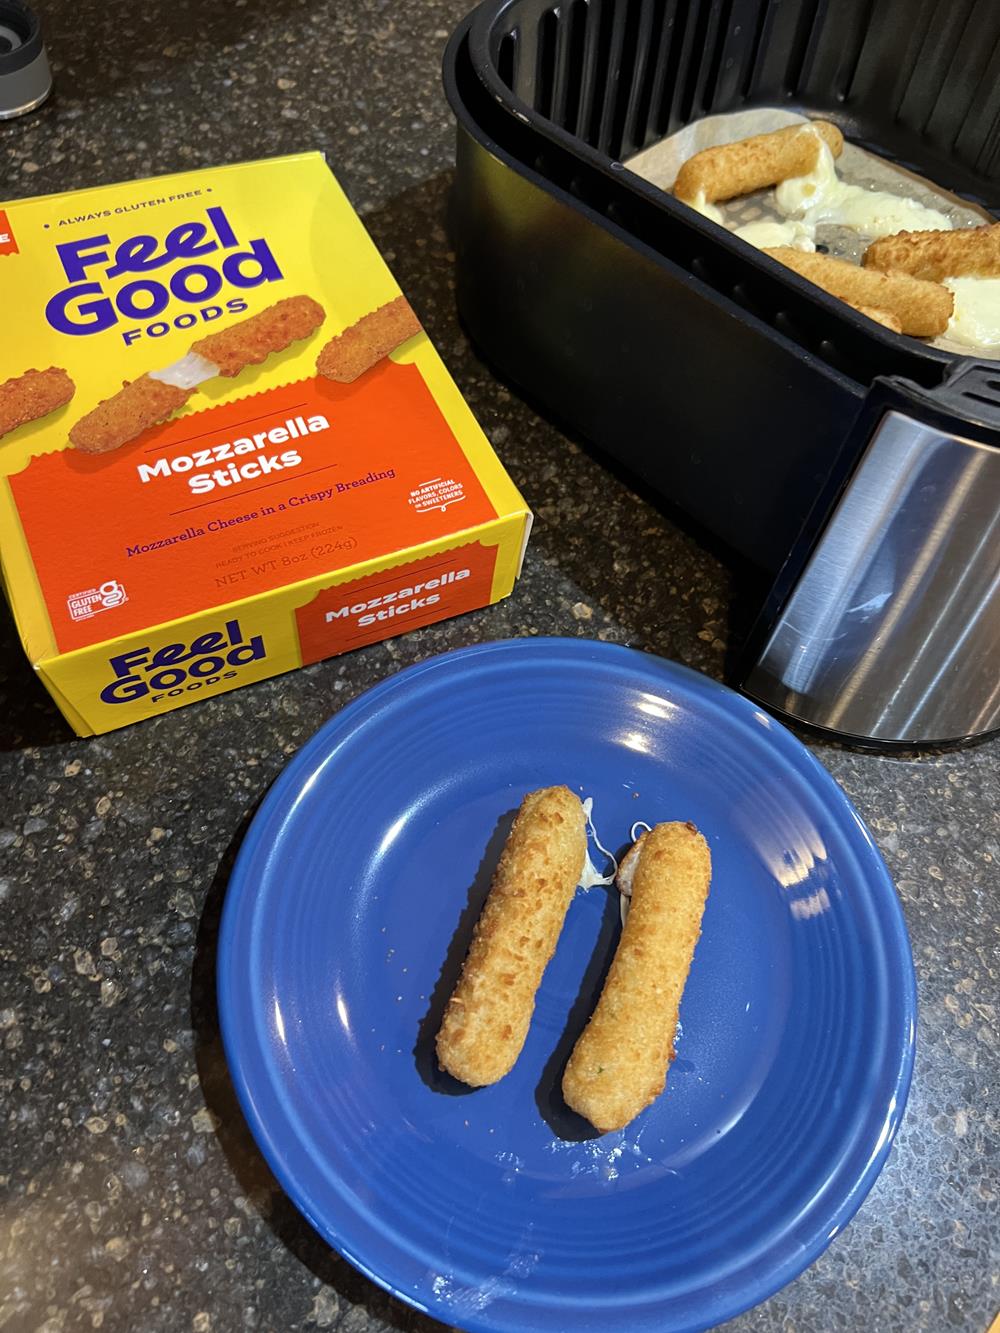 Feel Good Gluten Free Mozzarella Sticks on plate with box in the background